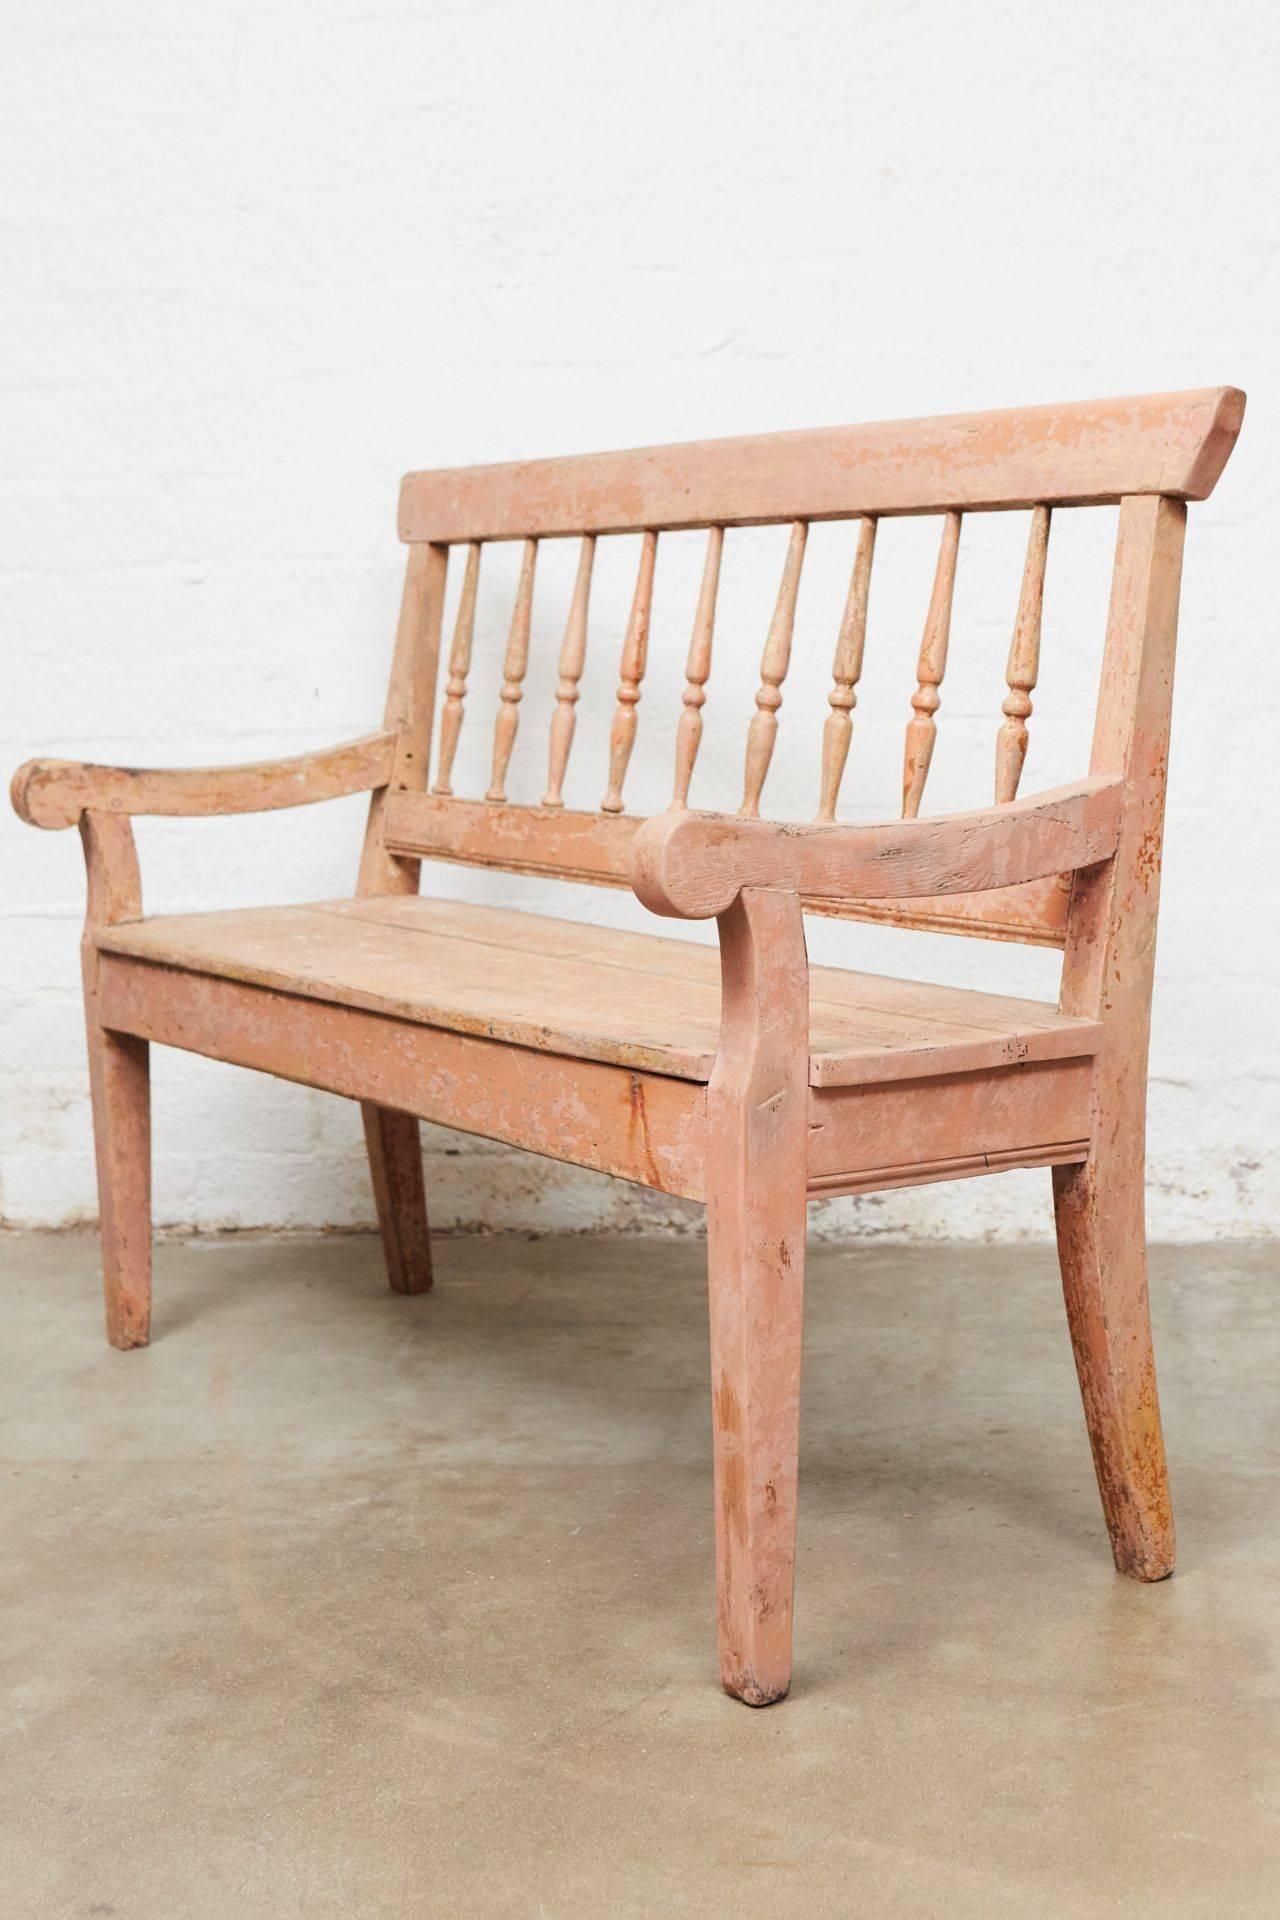 Spindle back bench for two with two arms on four square tapered legs, shaped arms and top rail. Once painted pinkish orange, surface shows fading, rubbing, losses as is usual with a distressed finish.